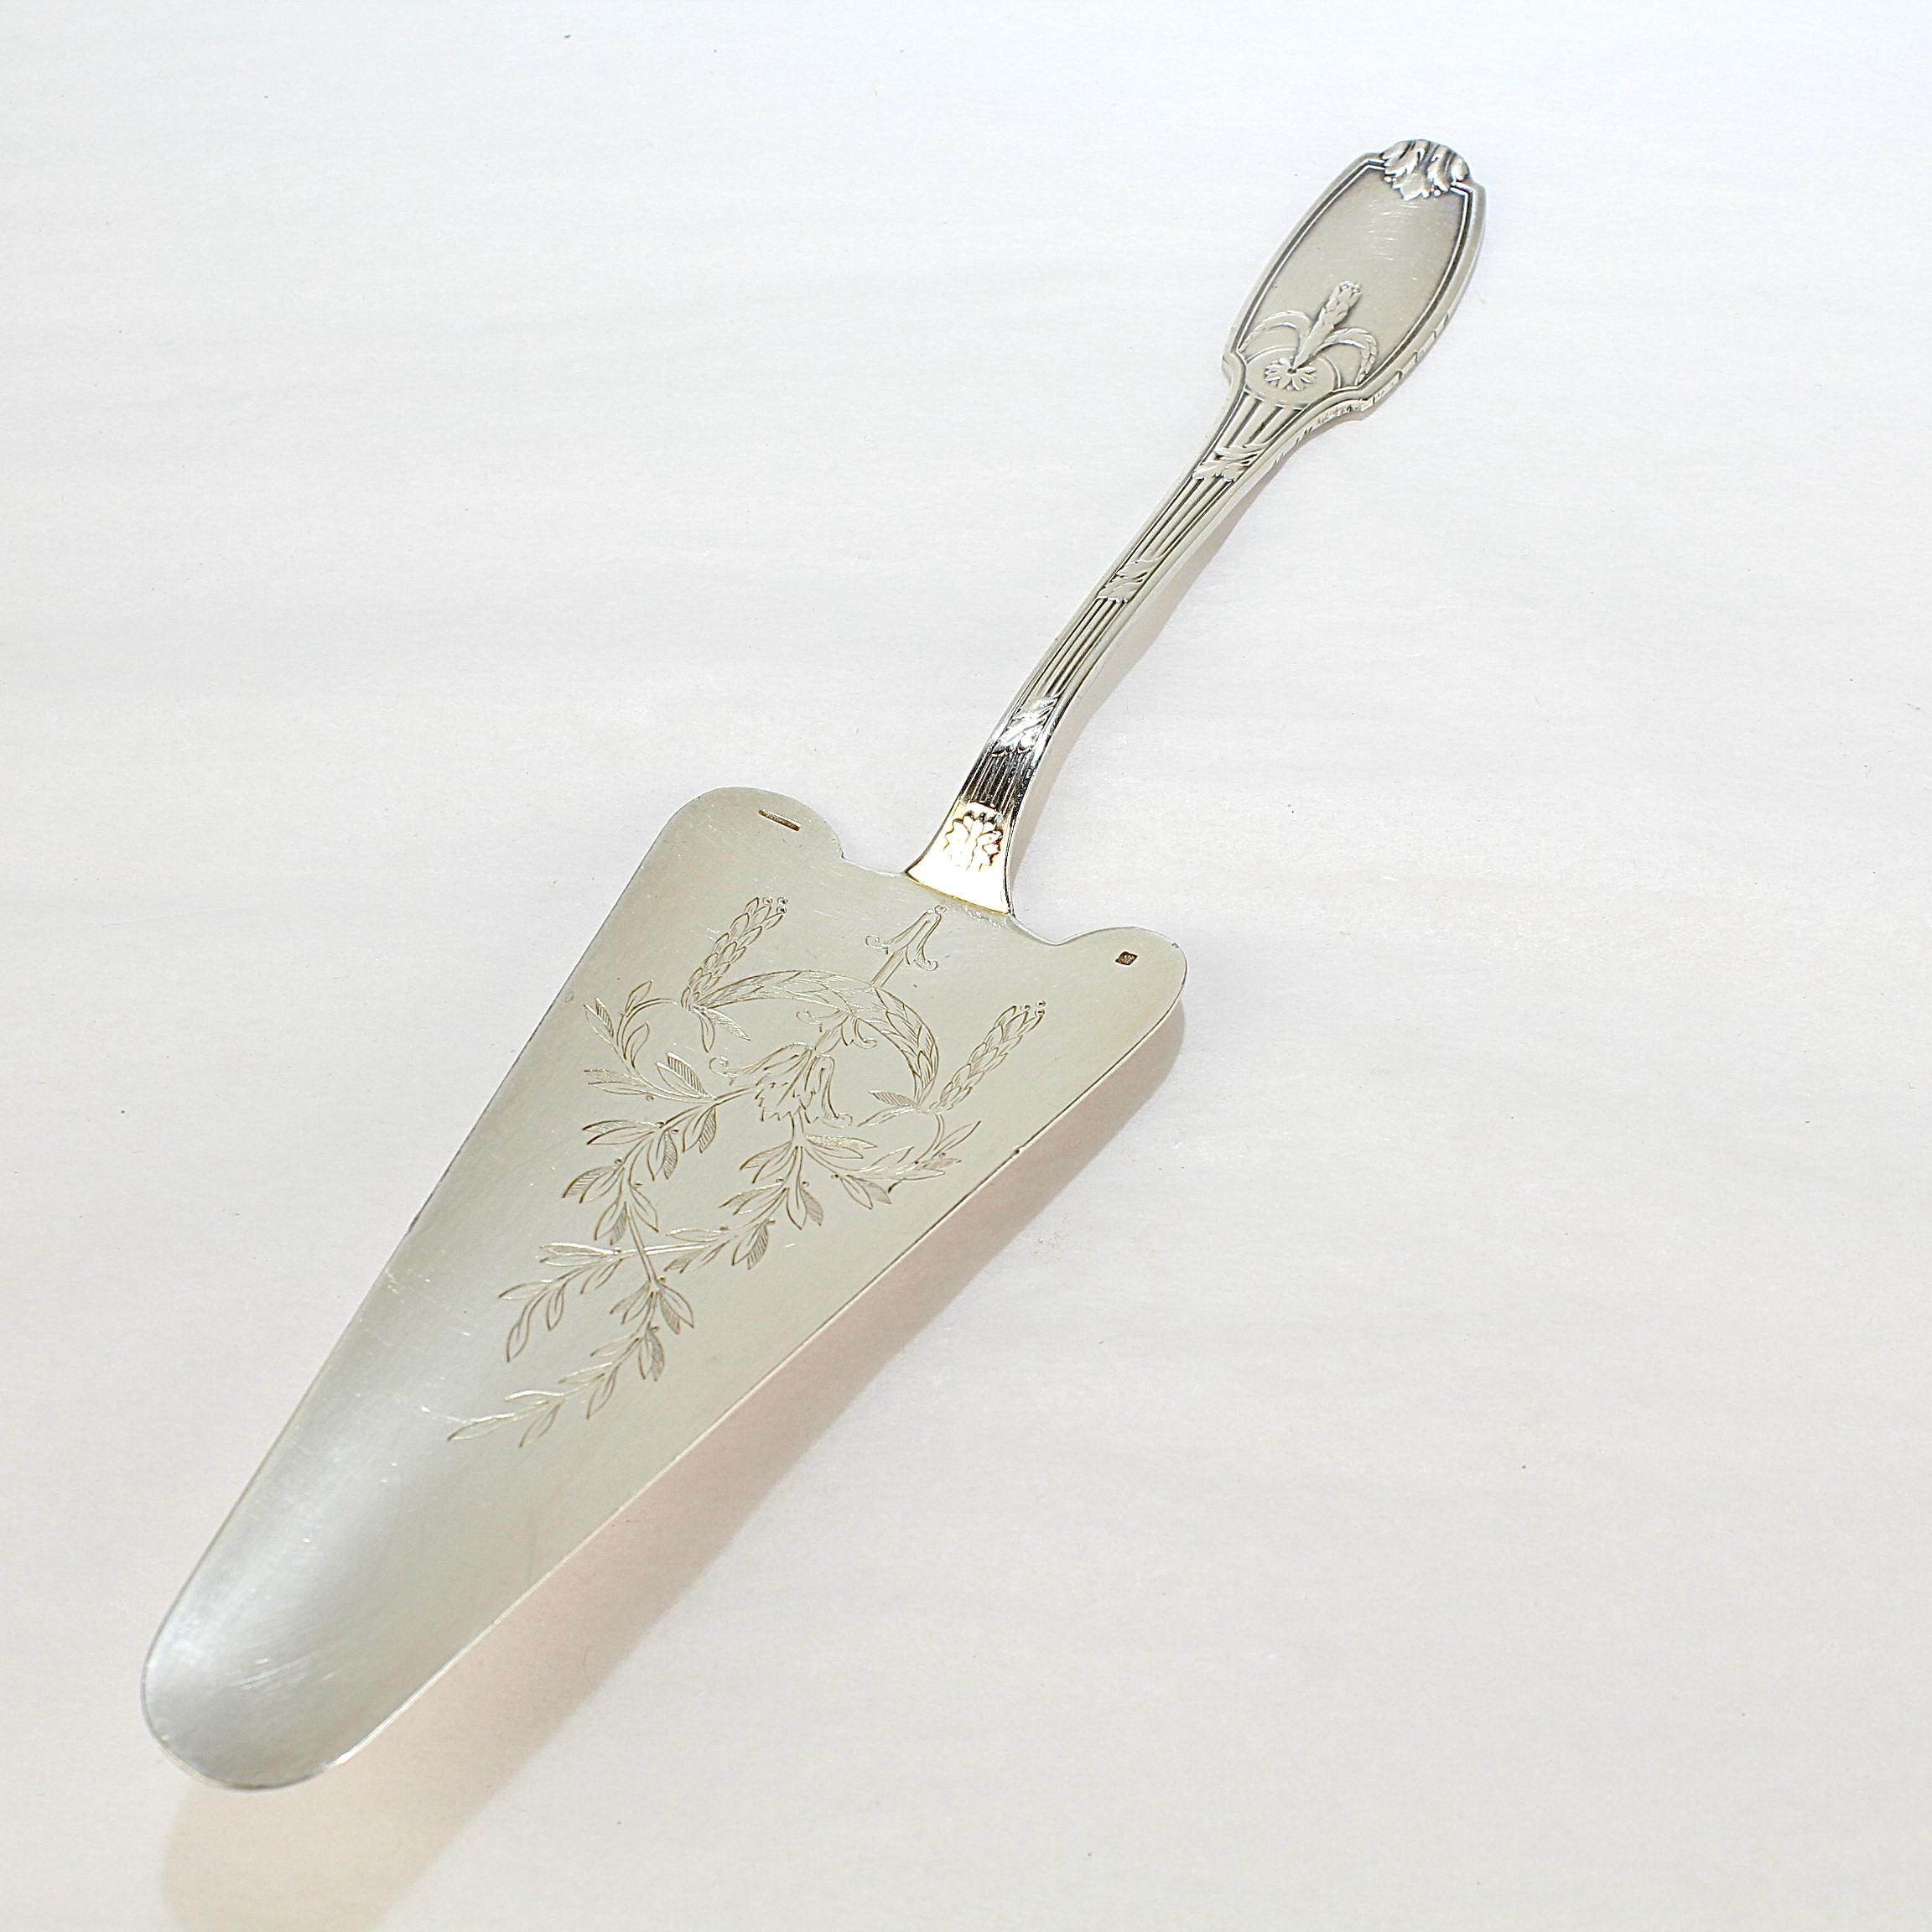 A fine silver plate cake or pie server.

By Christofle France.

In the Delafosse pattern with wheat & flower decoration throughout. 

Simply a wonderful server in the hard-to-find Delafosse pattern!

Date:
Early 20th Century

Overall Condition:
It